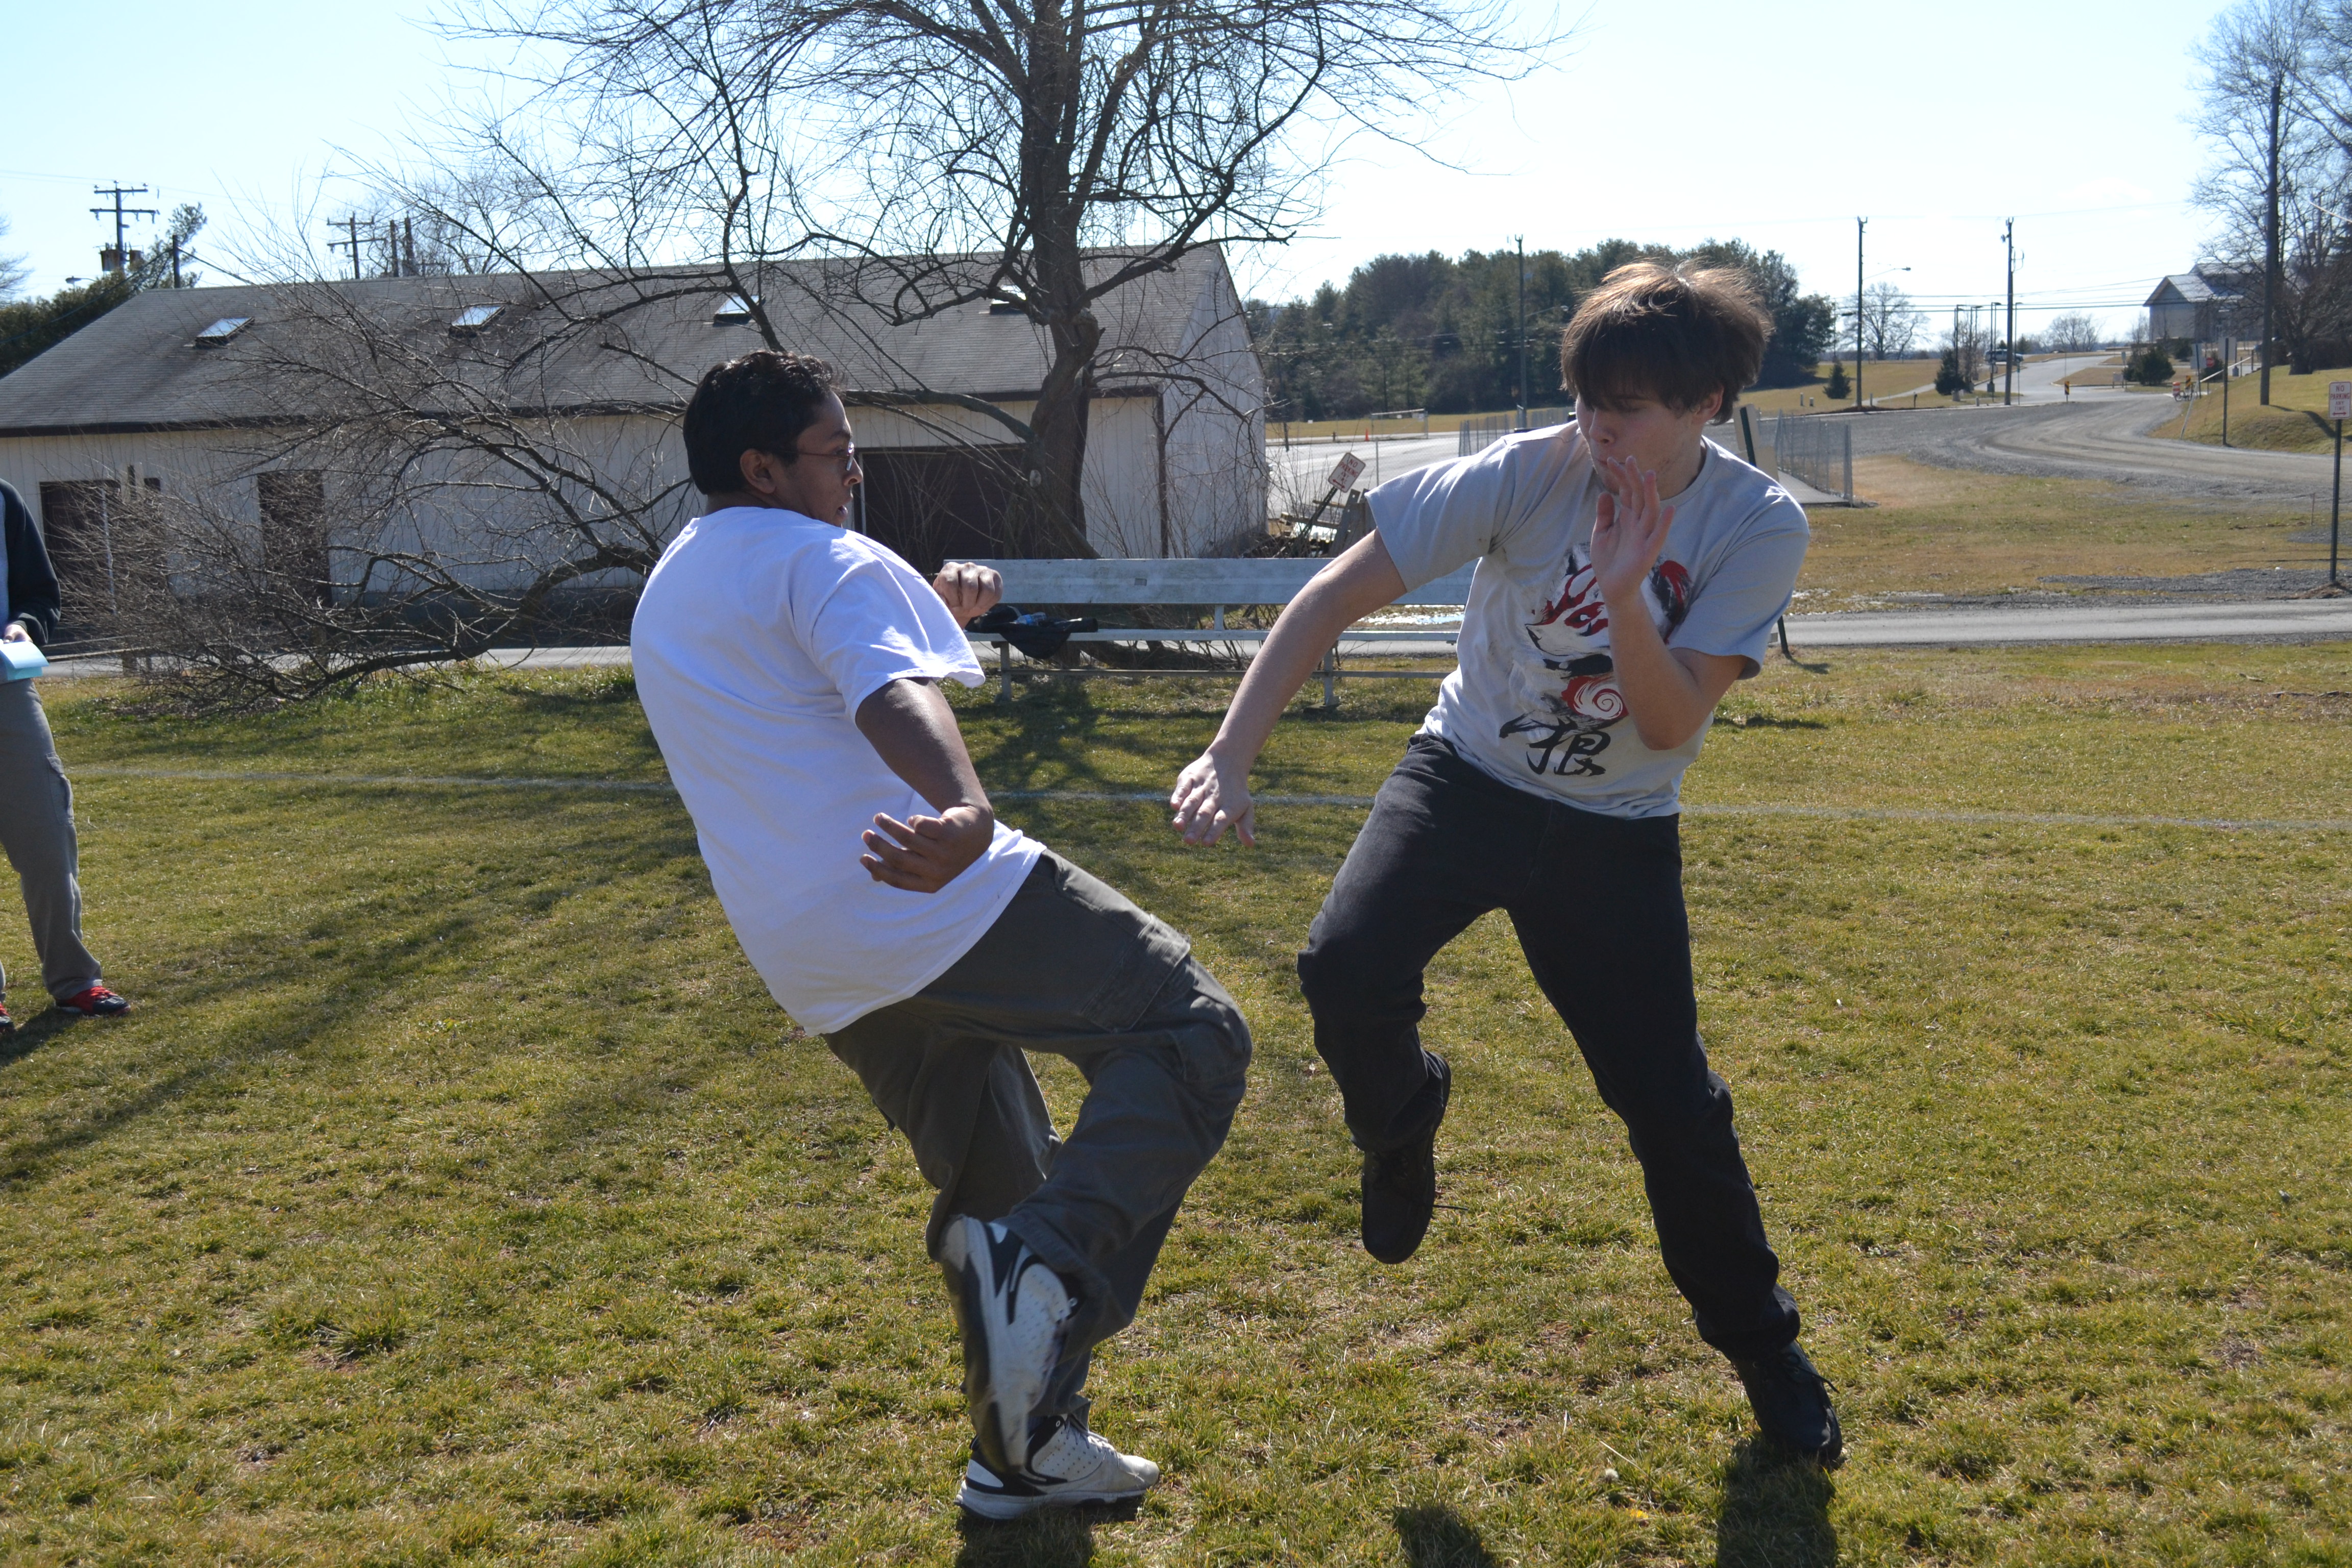 Junior Ian Soule and senior Sergio Ribeiro demonstrate their martial arts outside. “It helps you stay fit and react quickly,” Ribeiro said. “It really promotes self discipline.”